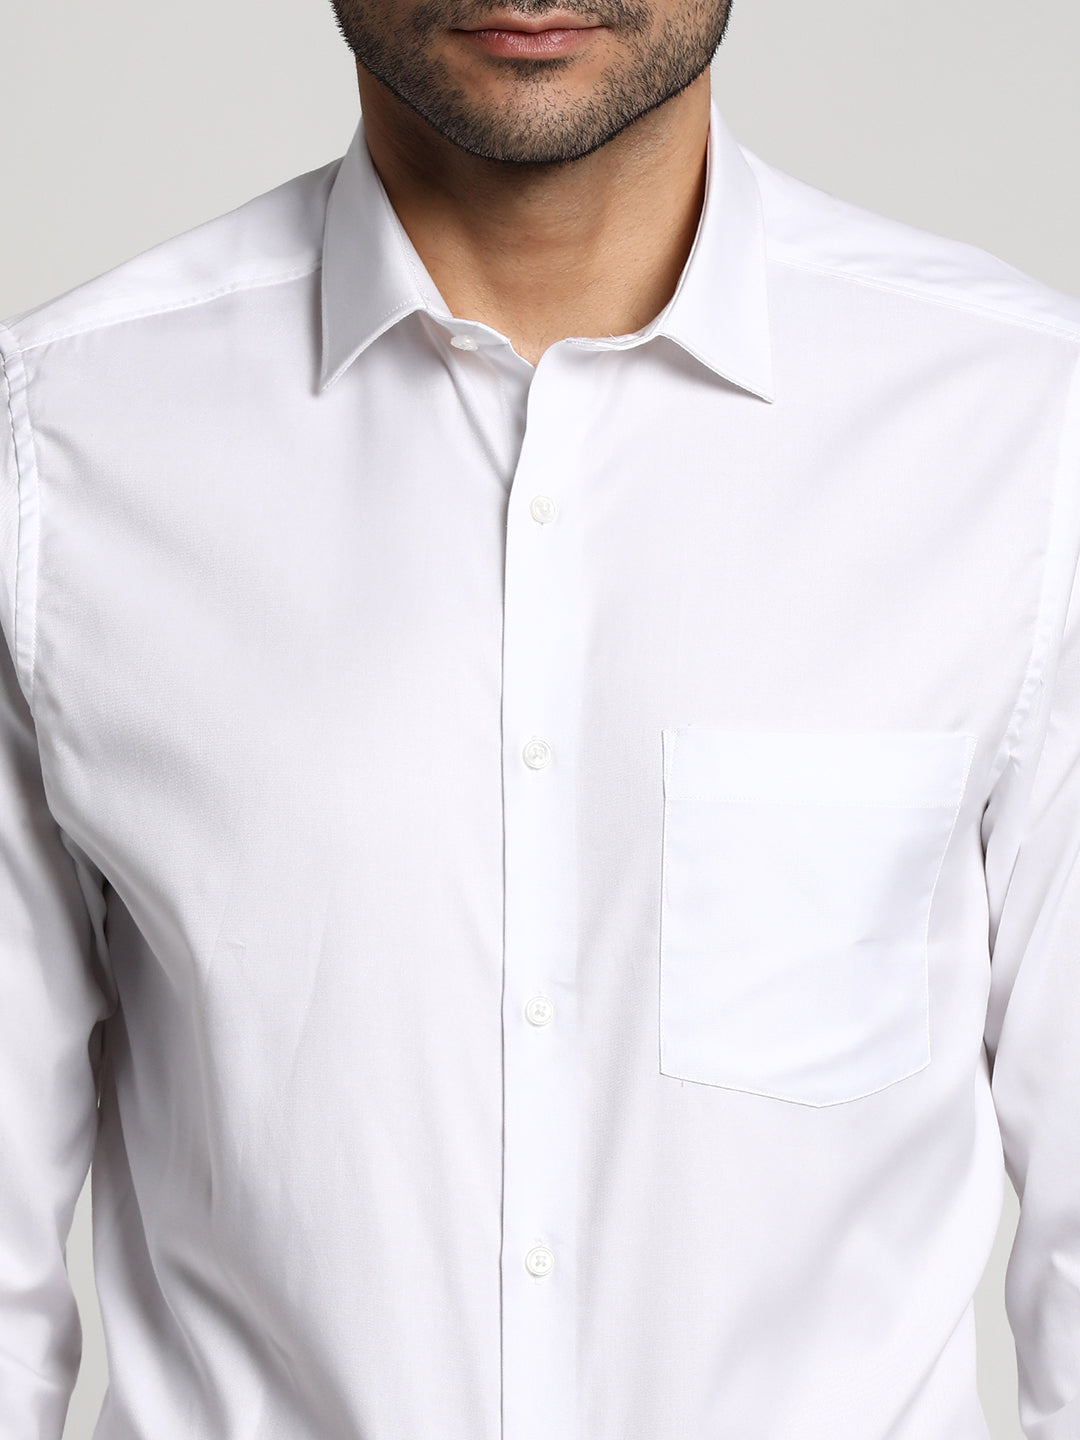 Cotton White Slim Fit Solid Formal Shirt